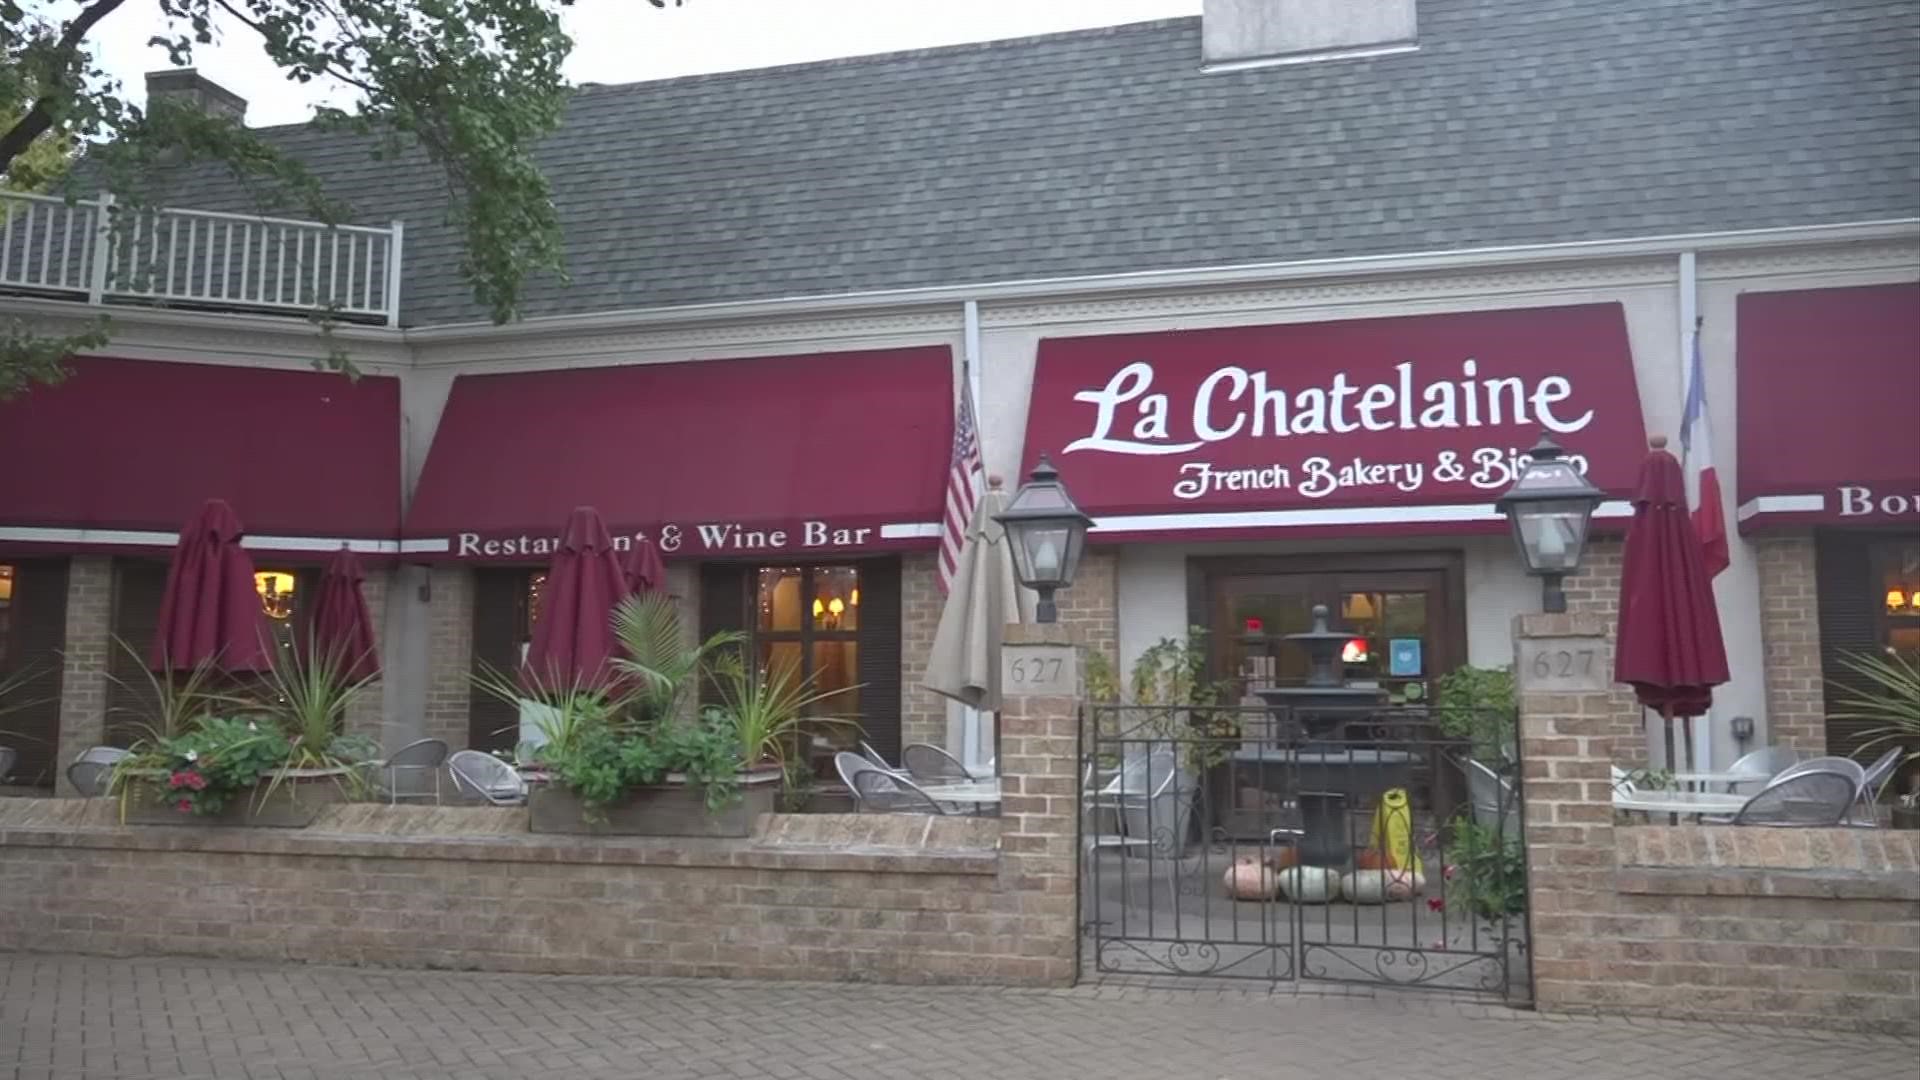 Employees of the La Chatelaine French Bakery and Bistro in Worthington found a window busted out and glass scattered across the floor Wednesday morning.